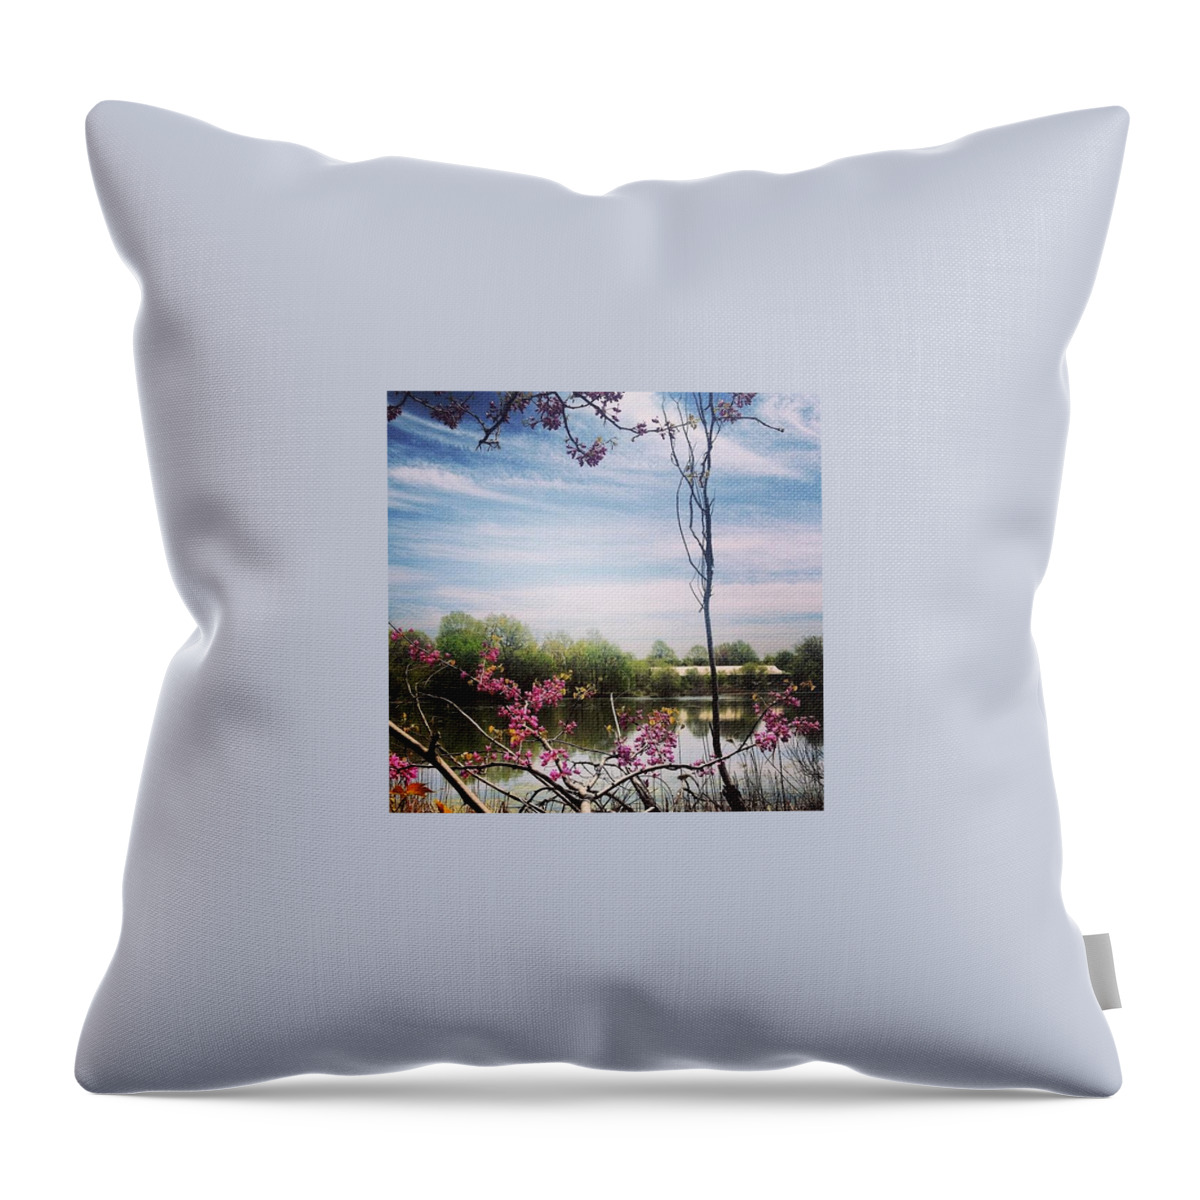 Beautiful Throw Pillow featuring the photograph #pleasedontmakemegoinside by Katie Cupcakes